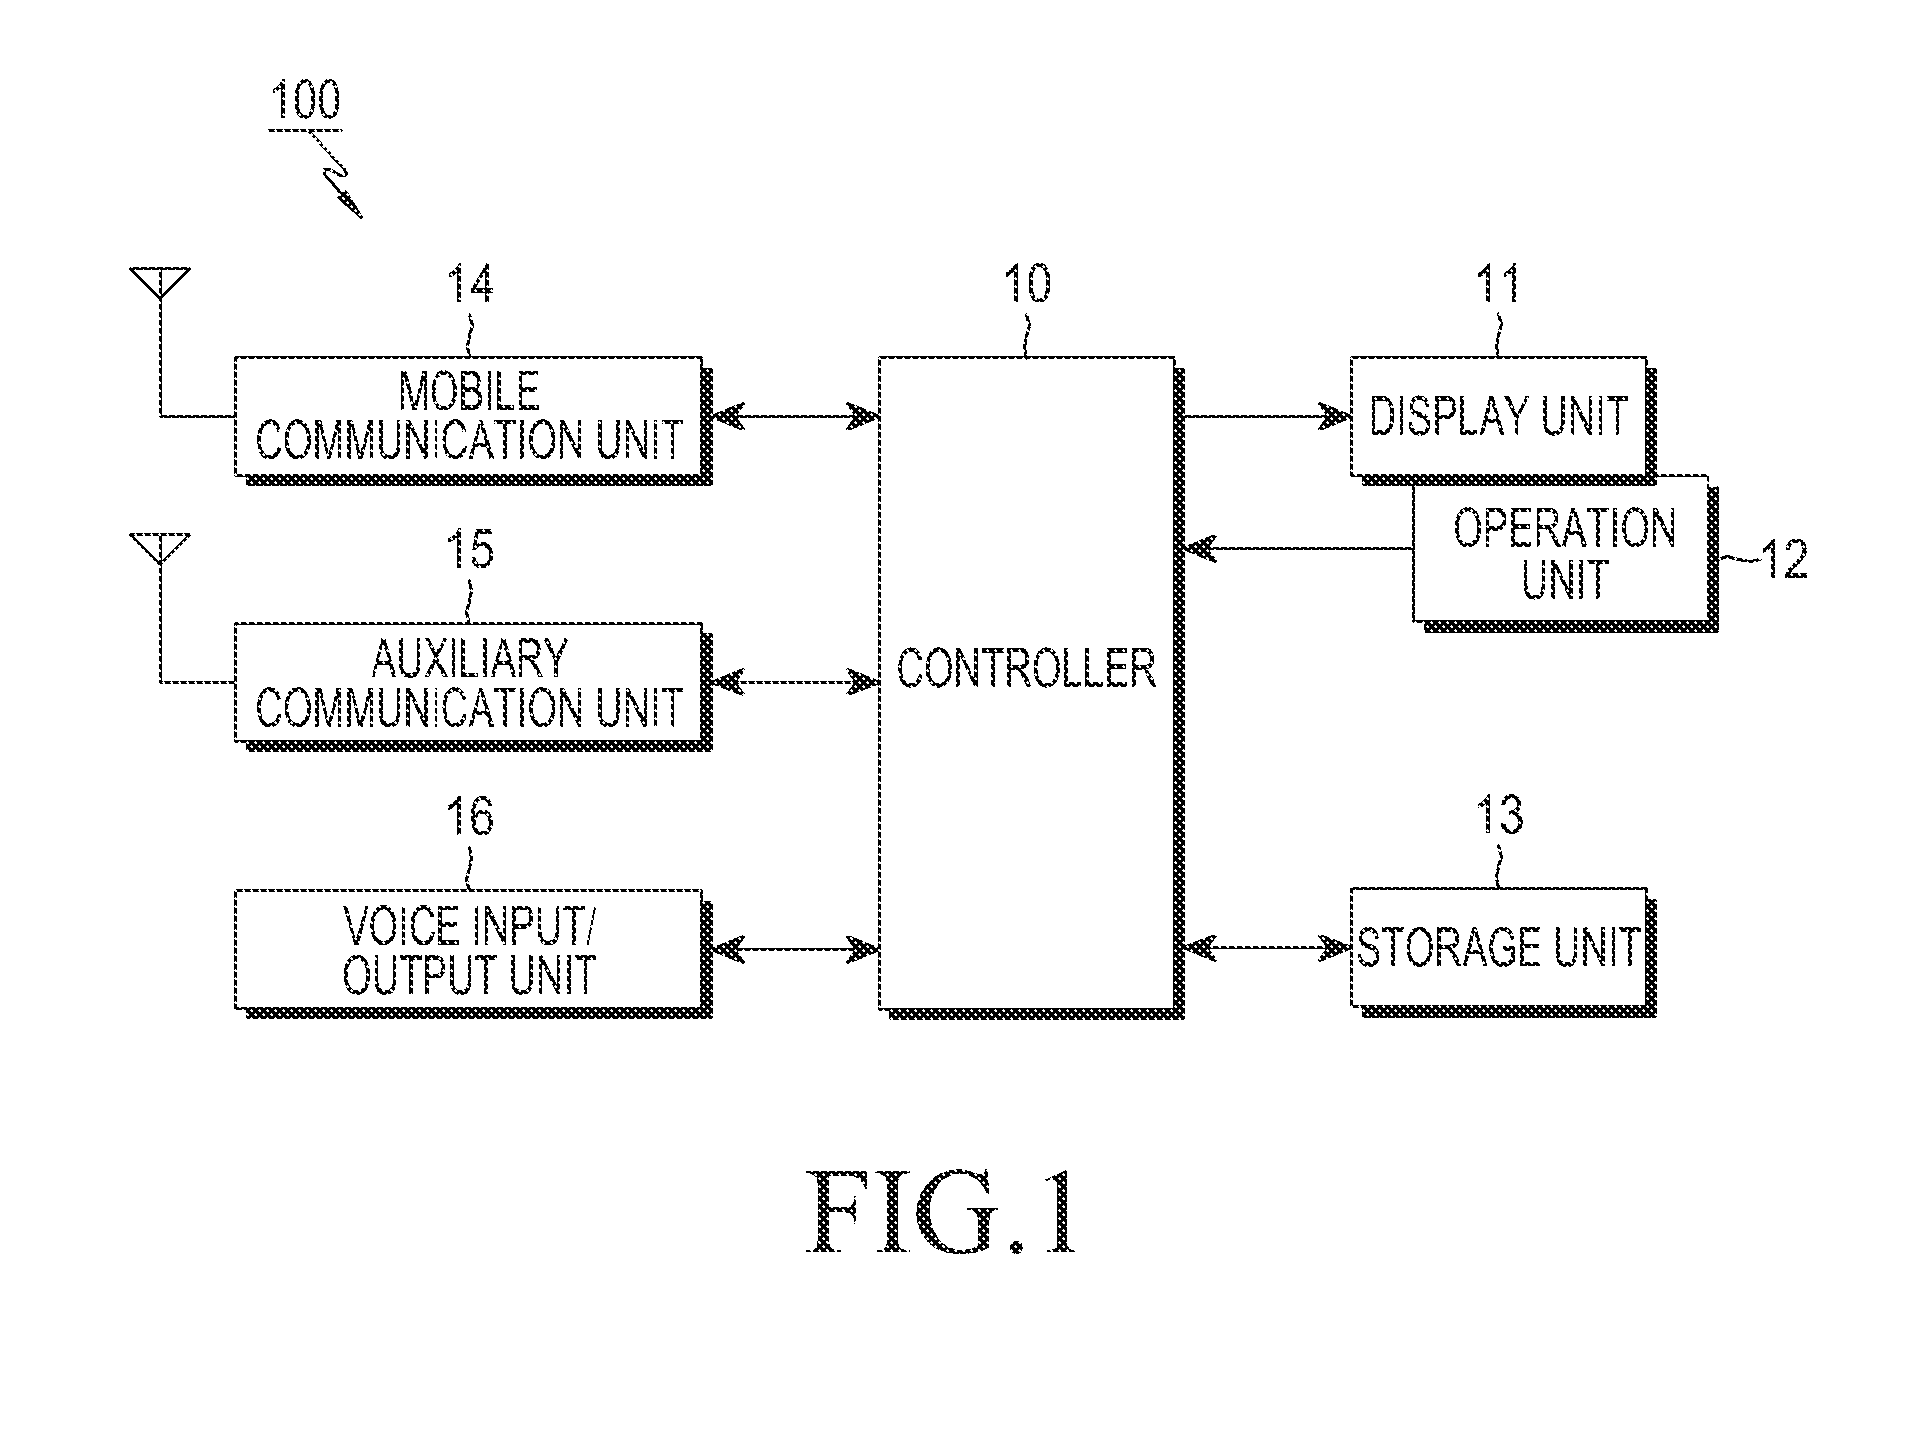 Method and apparatus for scrolling screen of display device